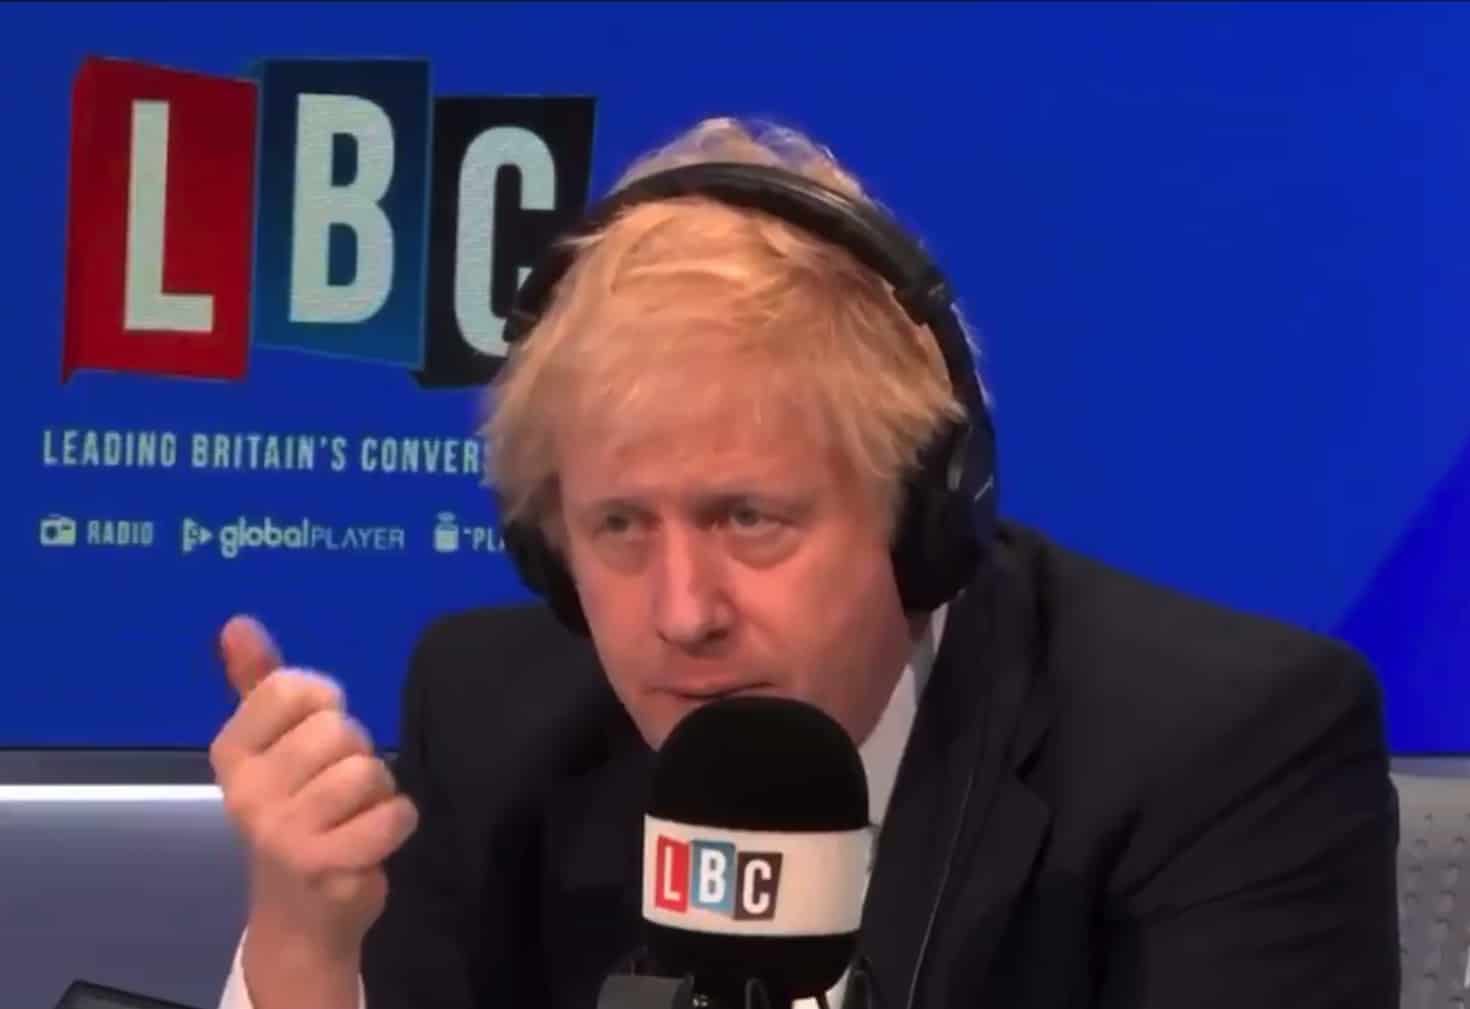 LBC clip from 2019 comes back to haunt PM